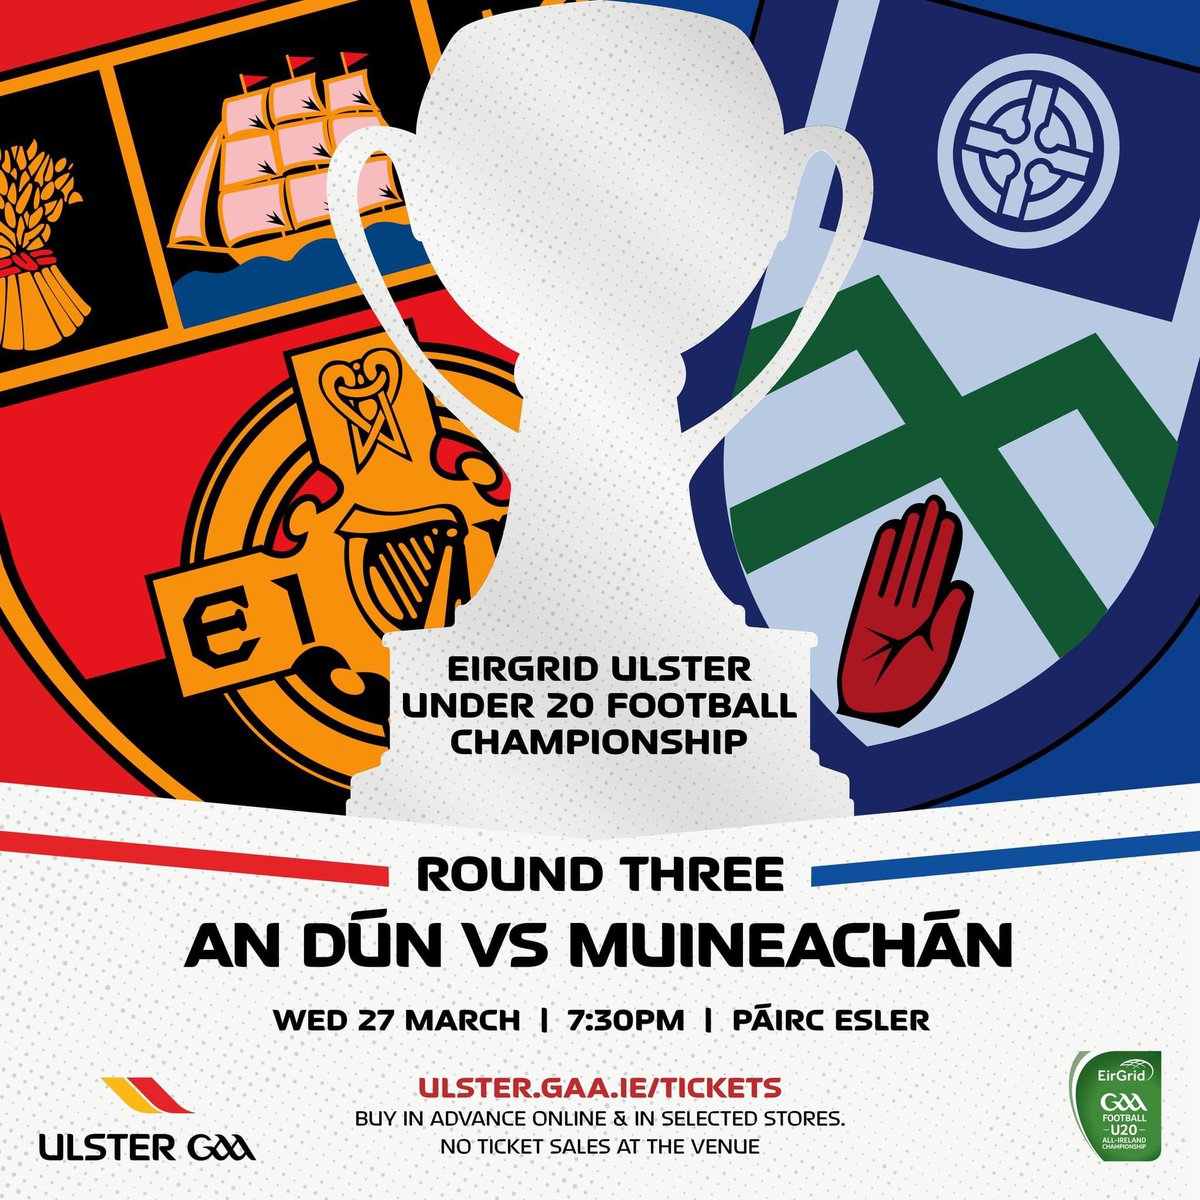 2024 EirGrid Ulster U20 Football Championship Round Three🏐

Down🟥⬛️ v Monaghan ⬜️🟦

Wed 27th March
7.30pm 
Páirc Esler

🎟️ Buy tickets in advance online. No sales at venue
➡️ tinyurl.com/mr42ej2n

#Ulster2024